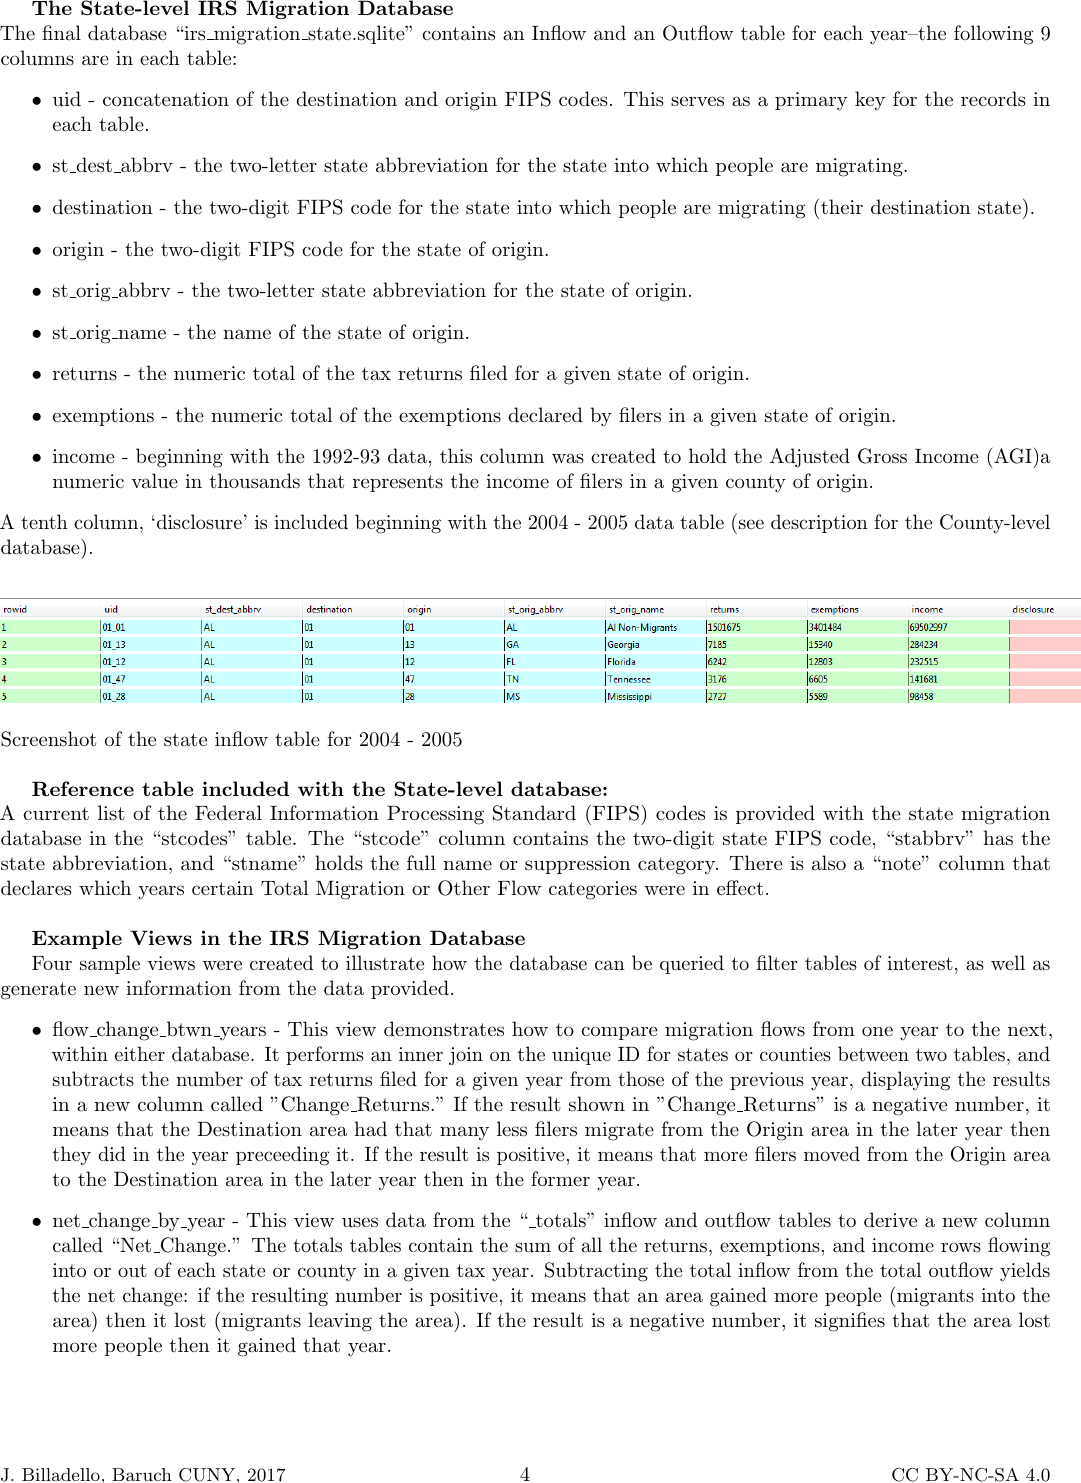 Page 4 of 5 - IRS Migration Database - User Summary Guide